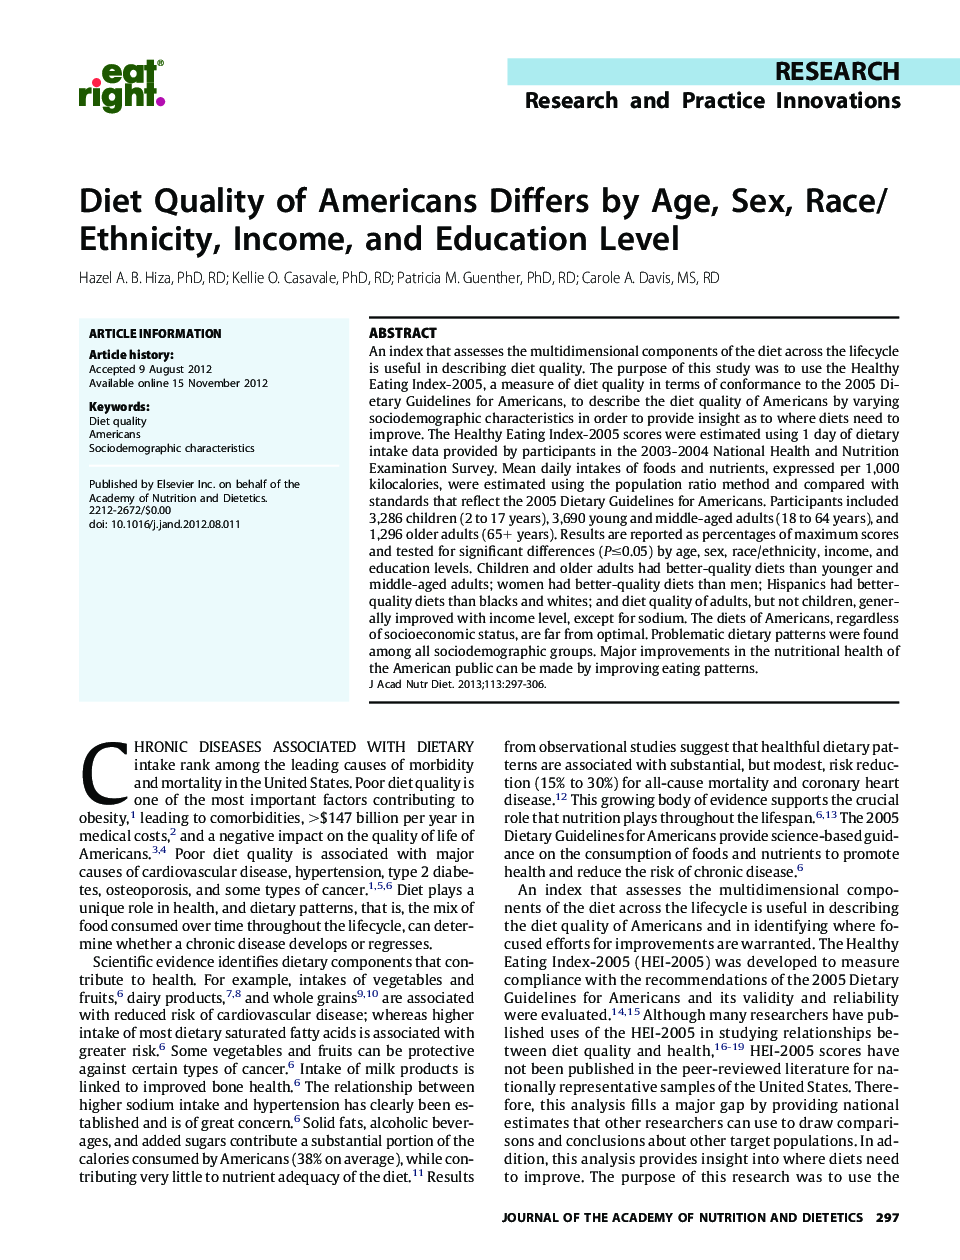 Diet Quality of Americans Differs by Age, Sex, Race/Ethnicity, Income, and Education Level 